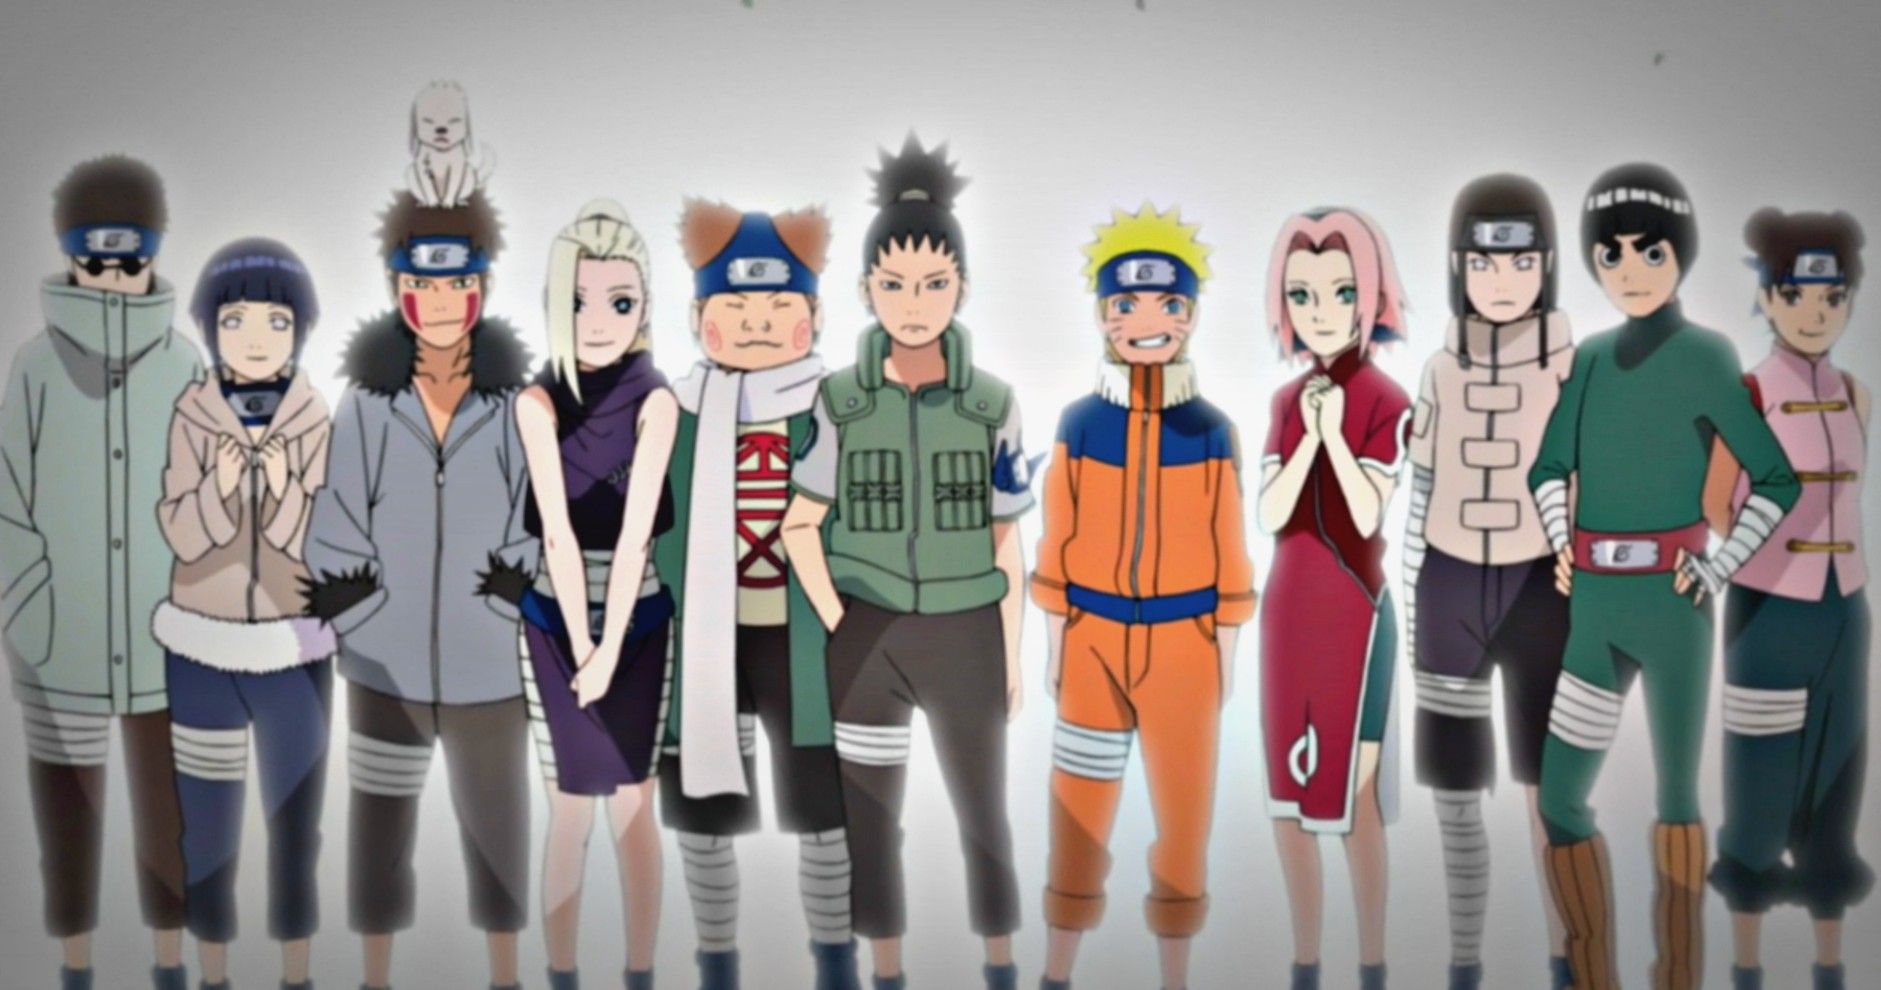 All of the Konoha 11 standing together in Naruto.